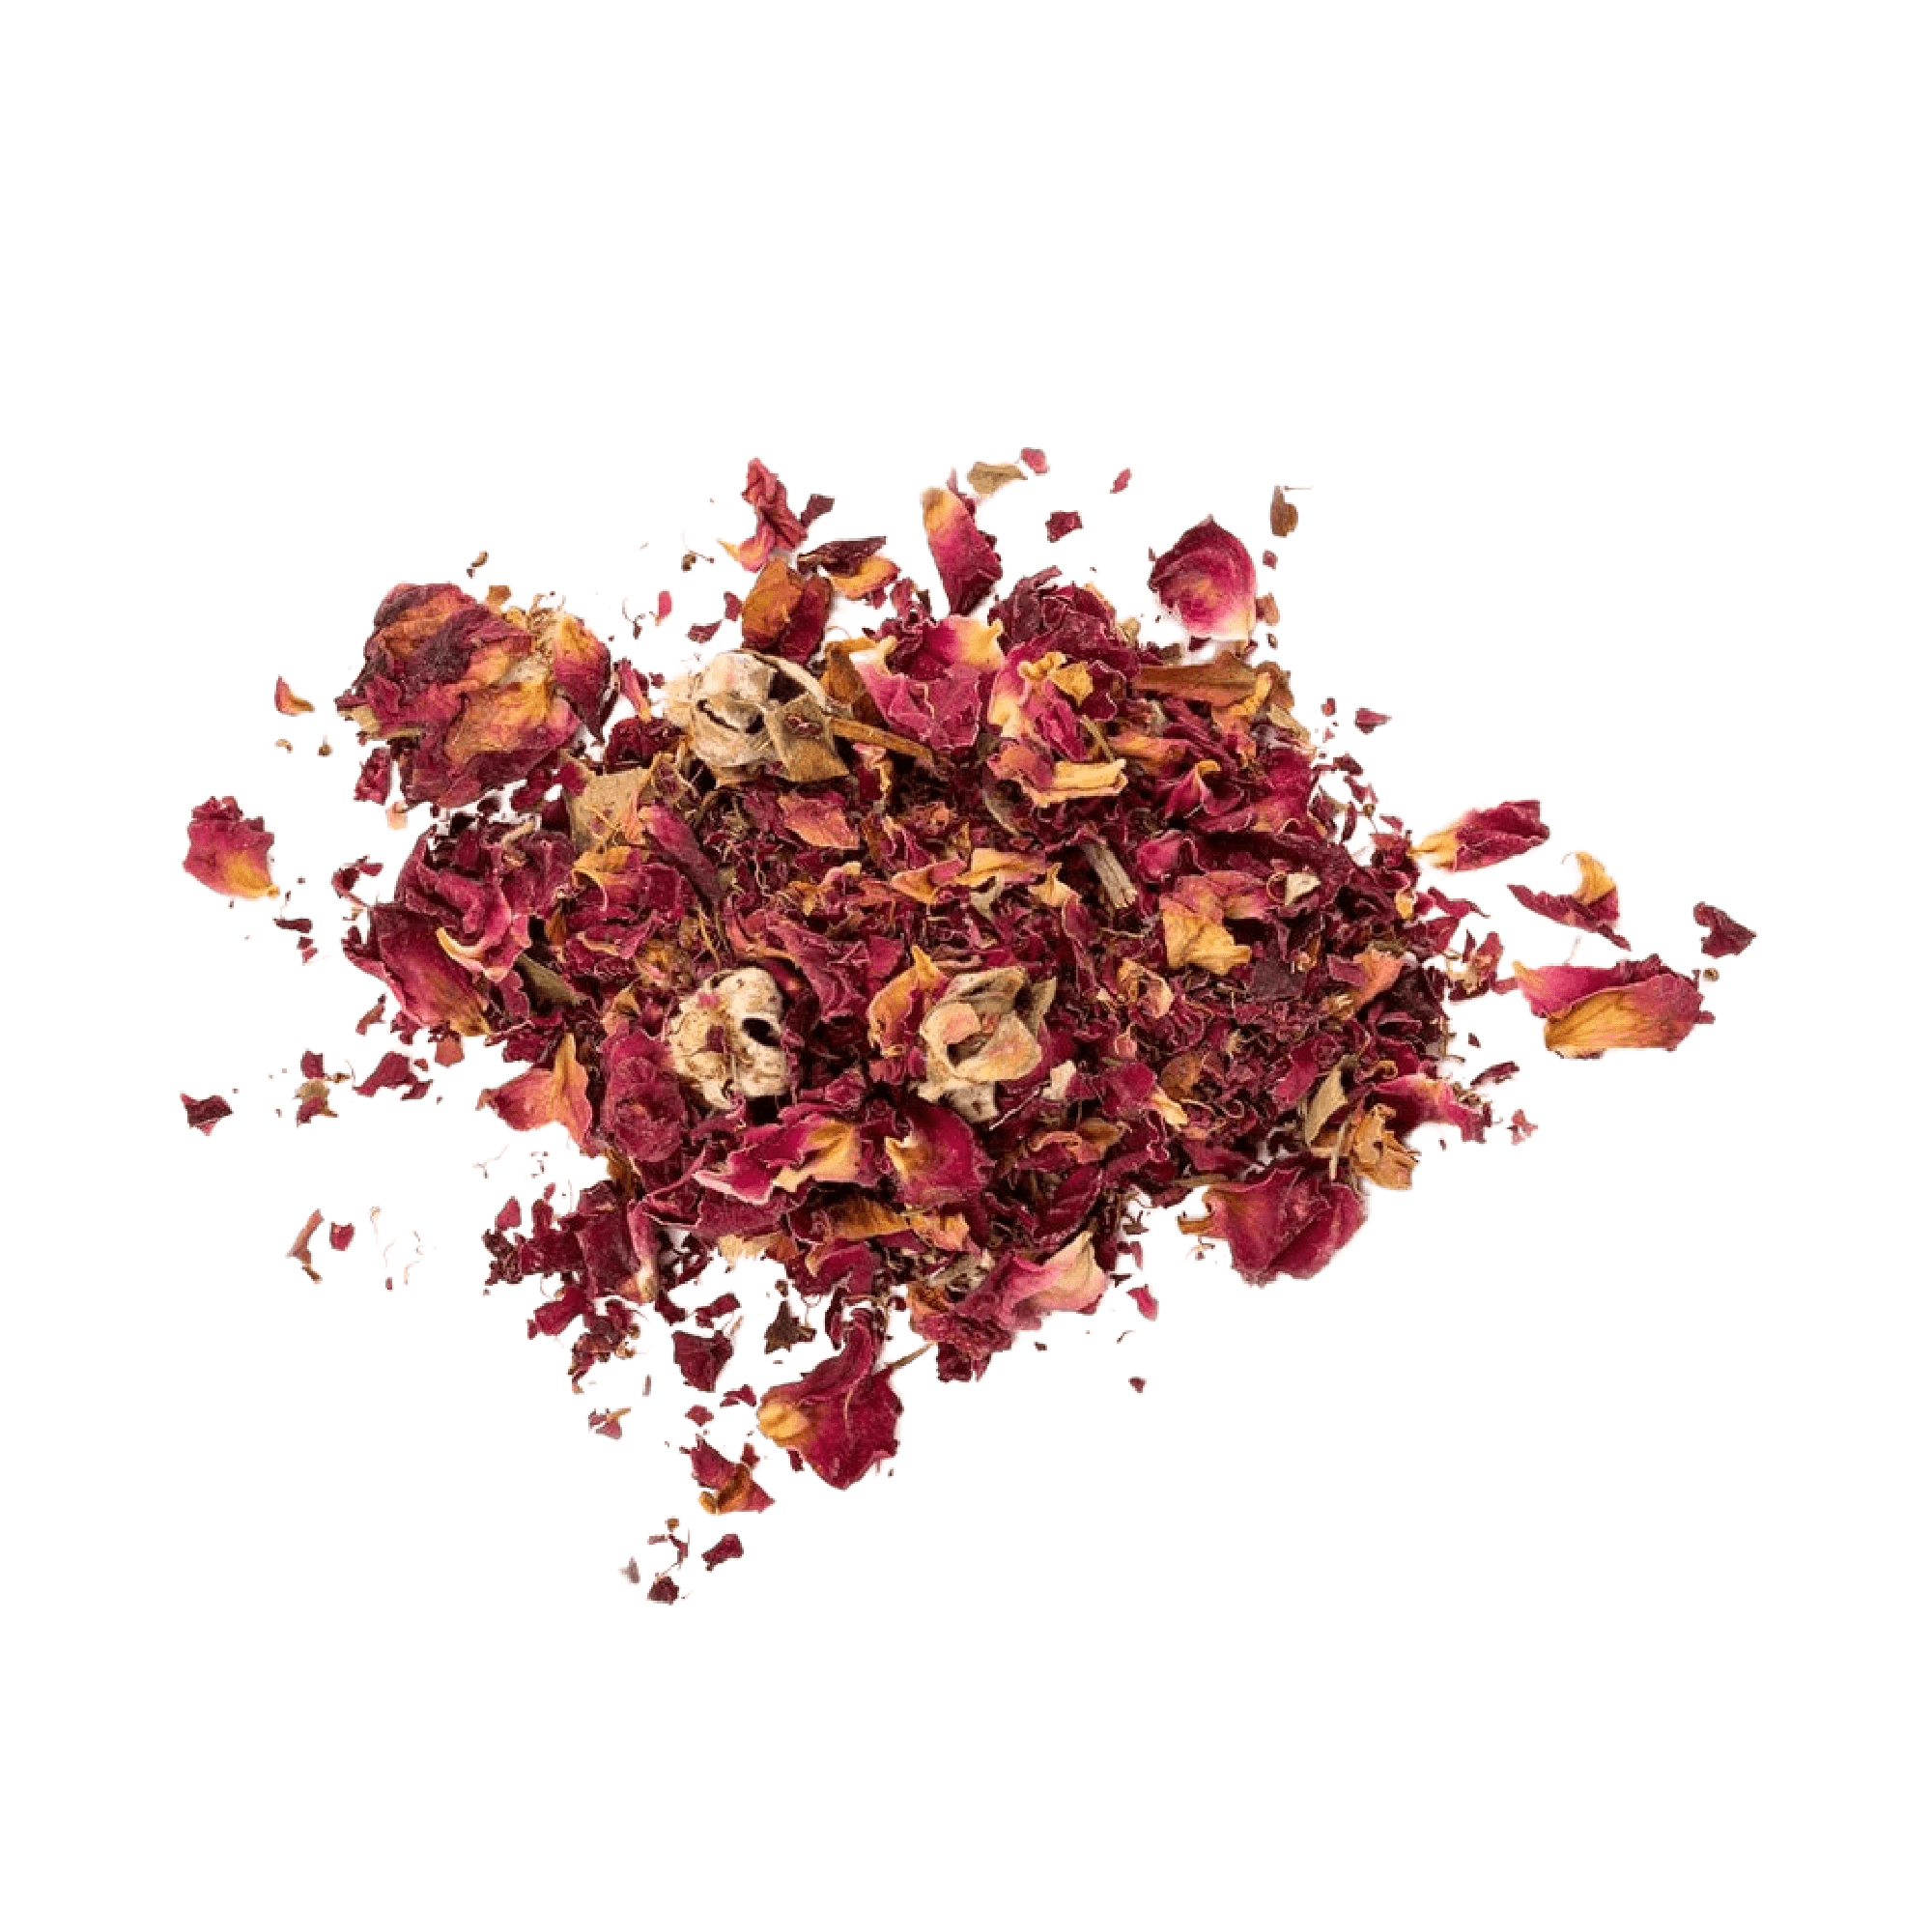 Mixed Dried flowers for Candle decorating - Rose Buds, Rose Petals,  Eucalyptus and more 12gm bag - Refill my Candles